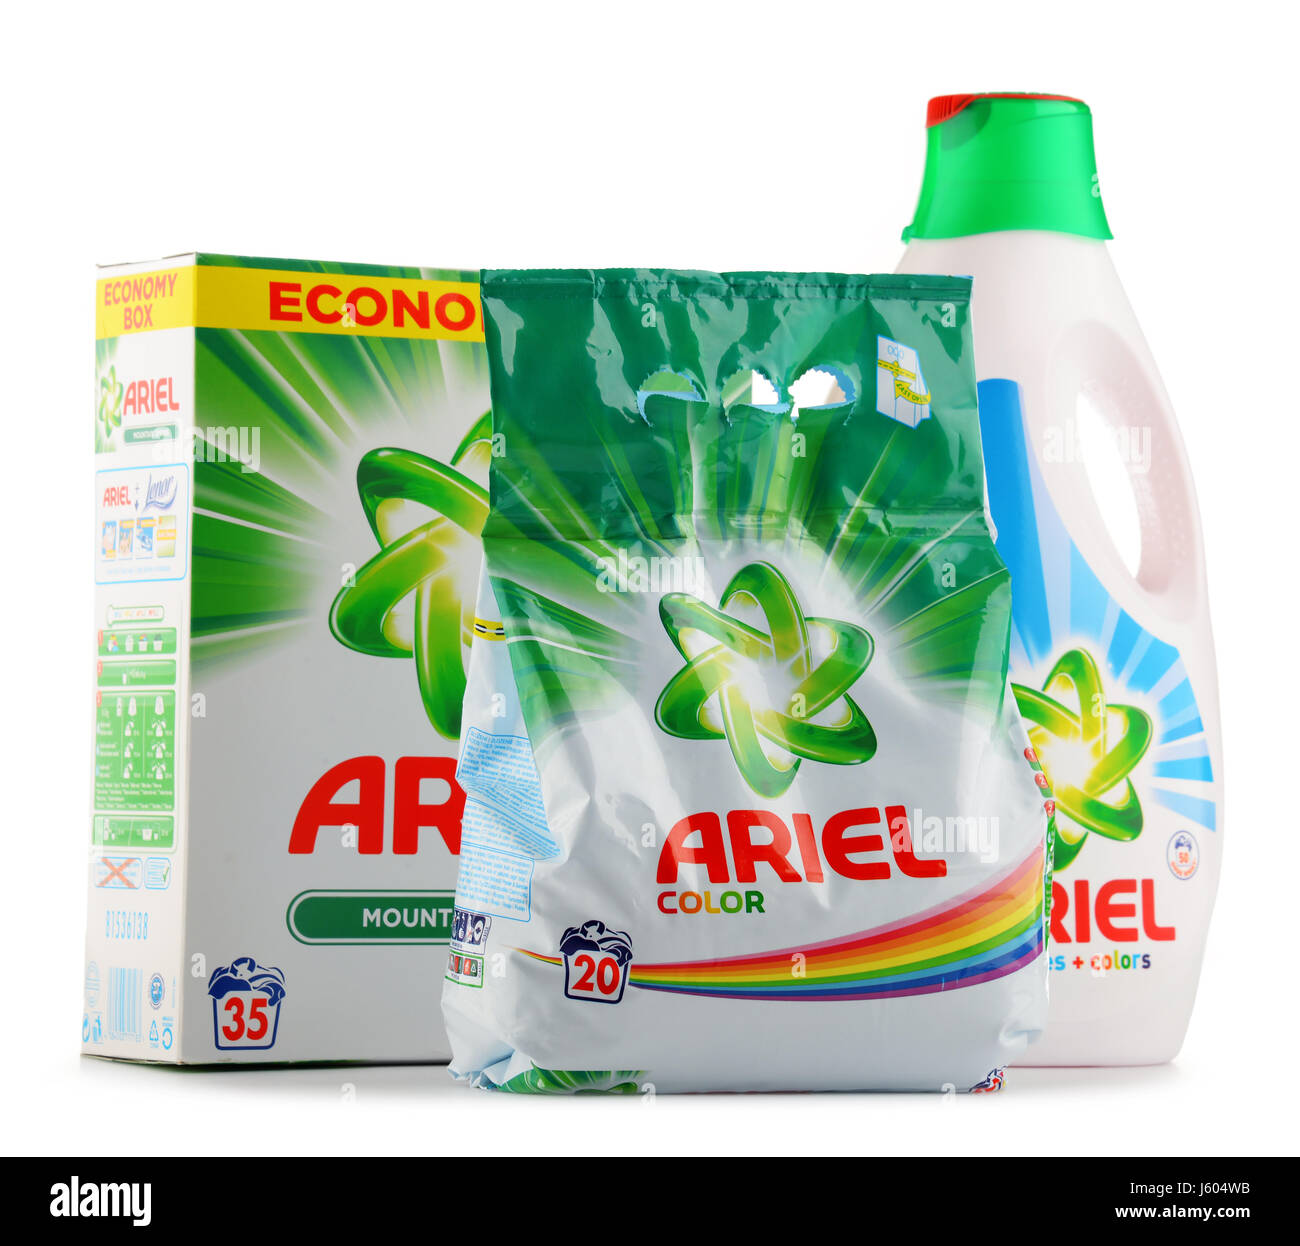 POZNAN, POLAND - JUNE 24, 2016: Ariel is a laundry detergent product the  flagship brand of Procter & Gamble corporation headquartered in Cincinnati,  O Stock Photo - Alamy